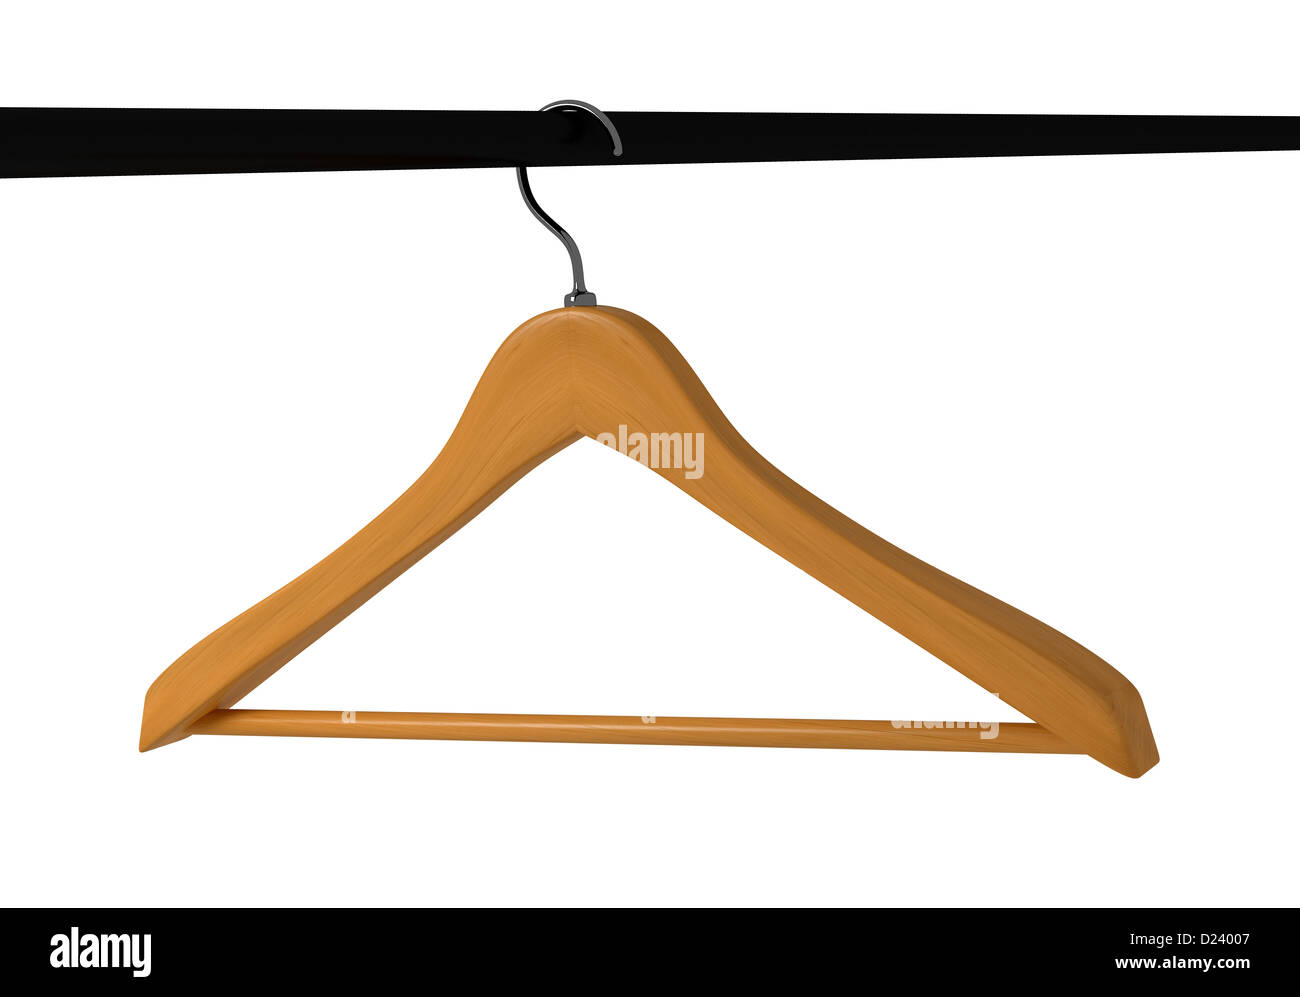 Wood hanger on the background Stock Photo